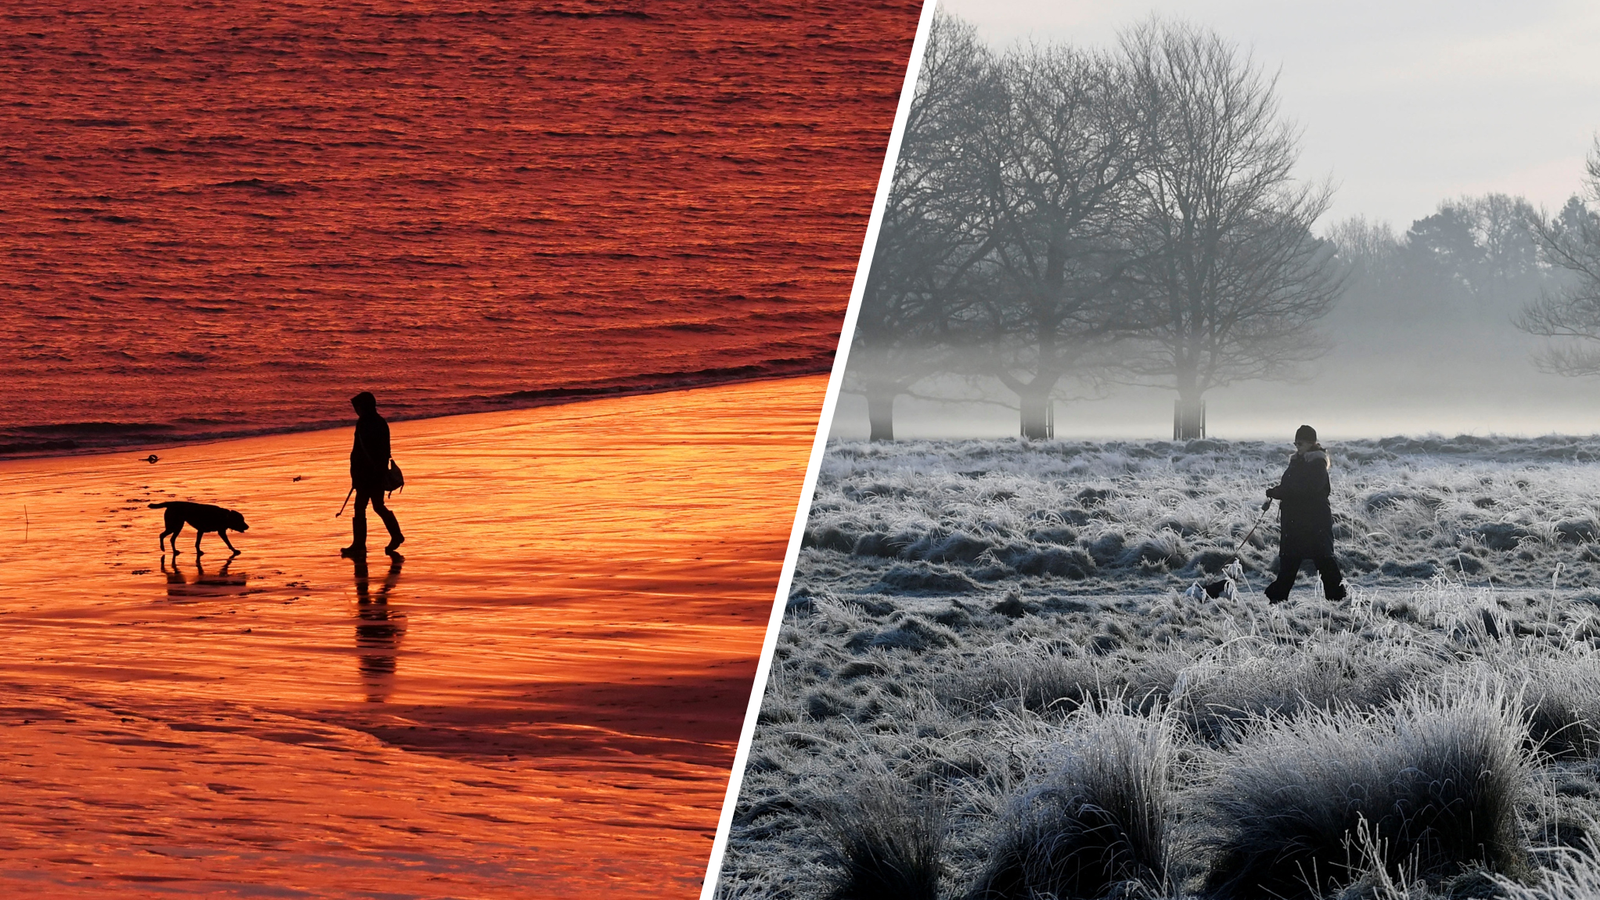 UK weather: -9C for some, 13C for others - Freezing fog alert in South... but it's going to be rather mild in Scotland